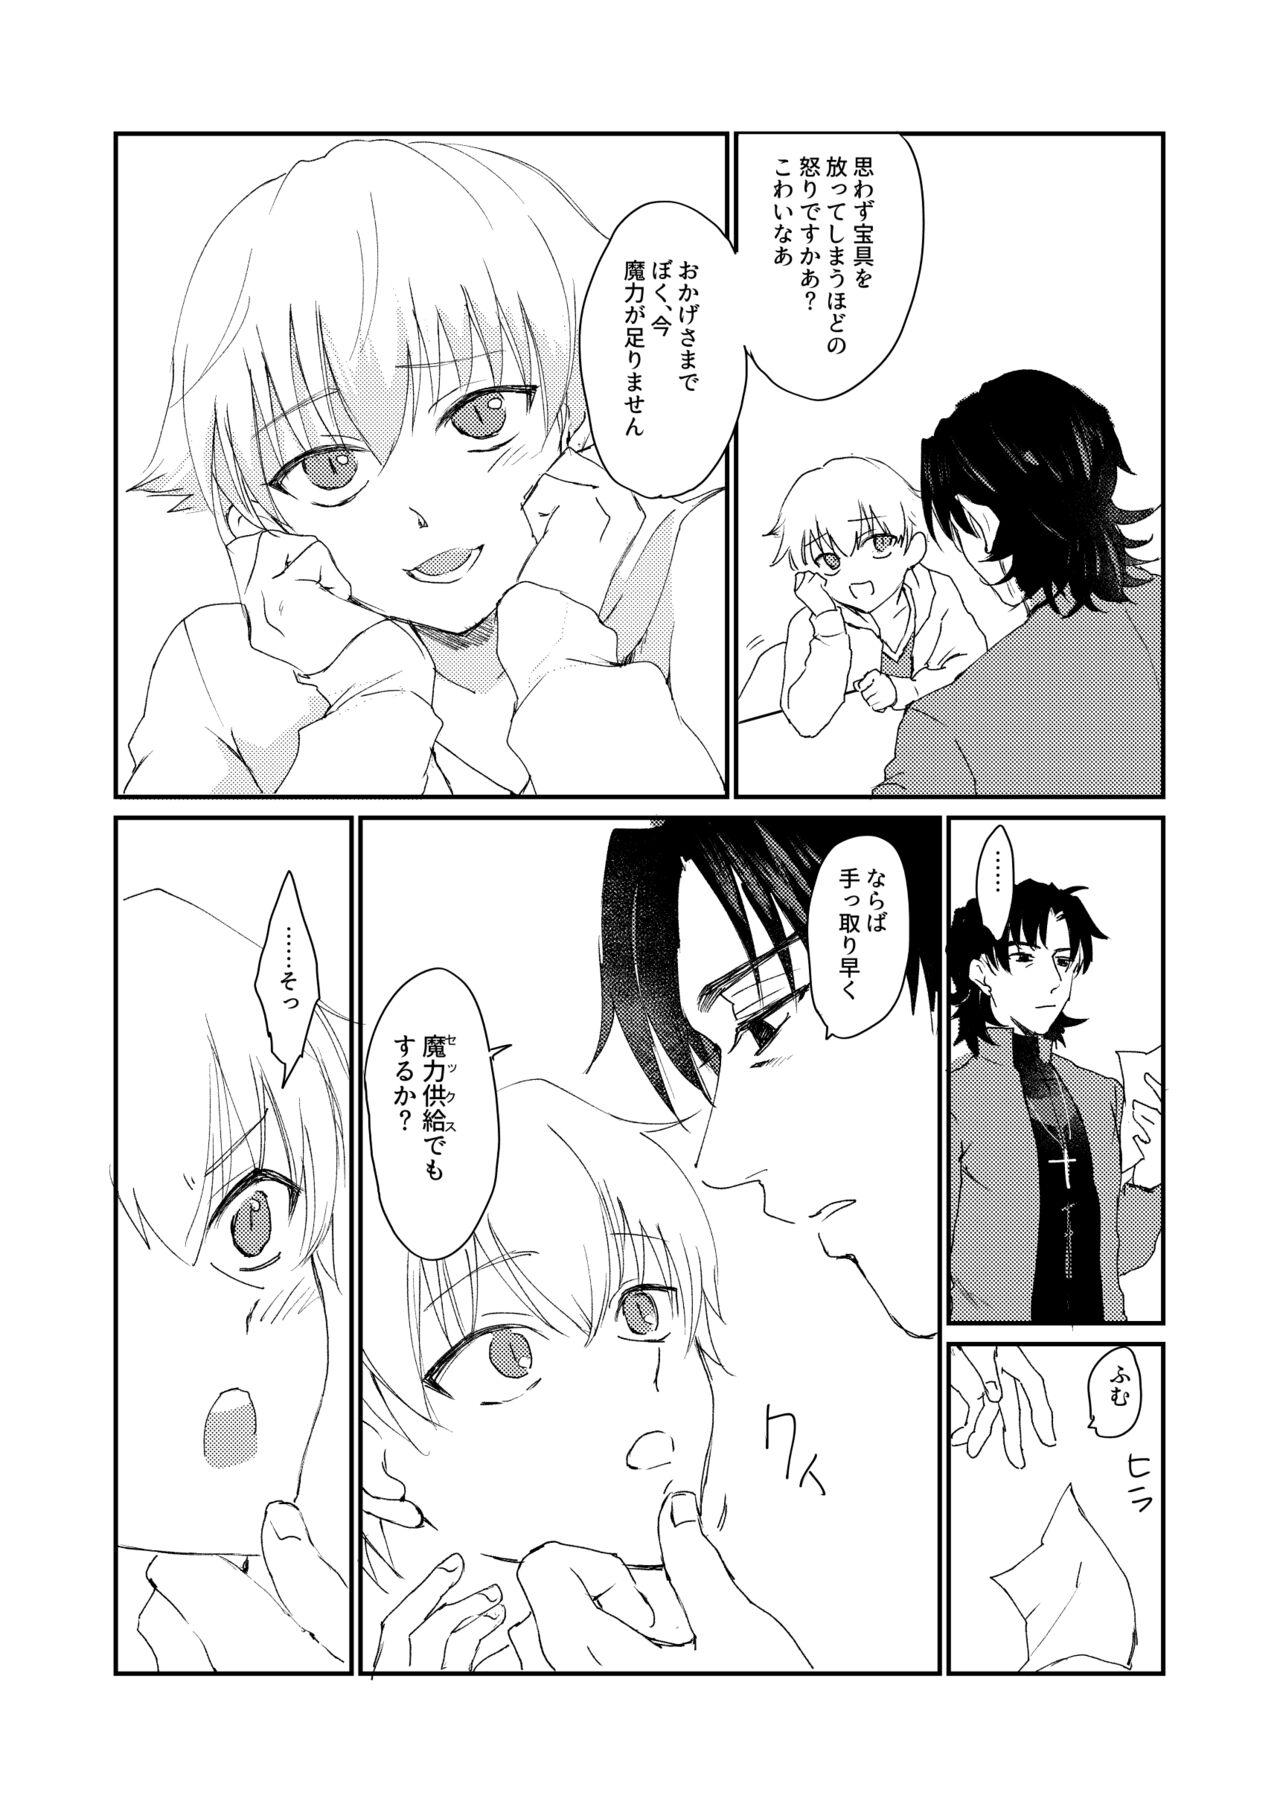 Petite Teenager ARE YOU KIDDING? - Fate zero Studs - Page 3